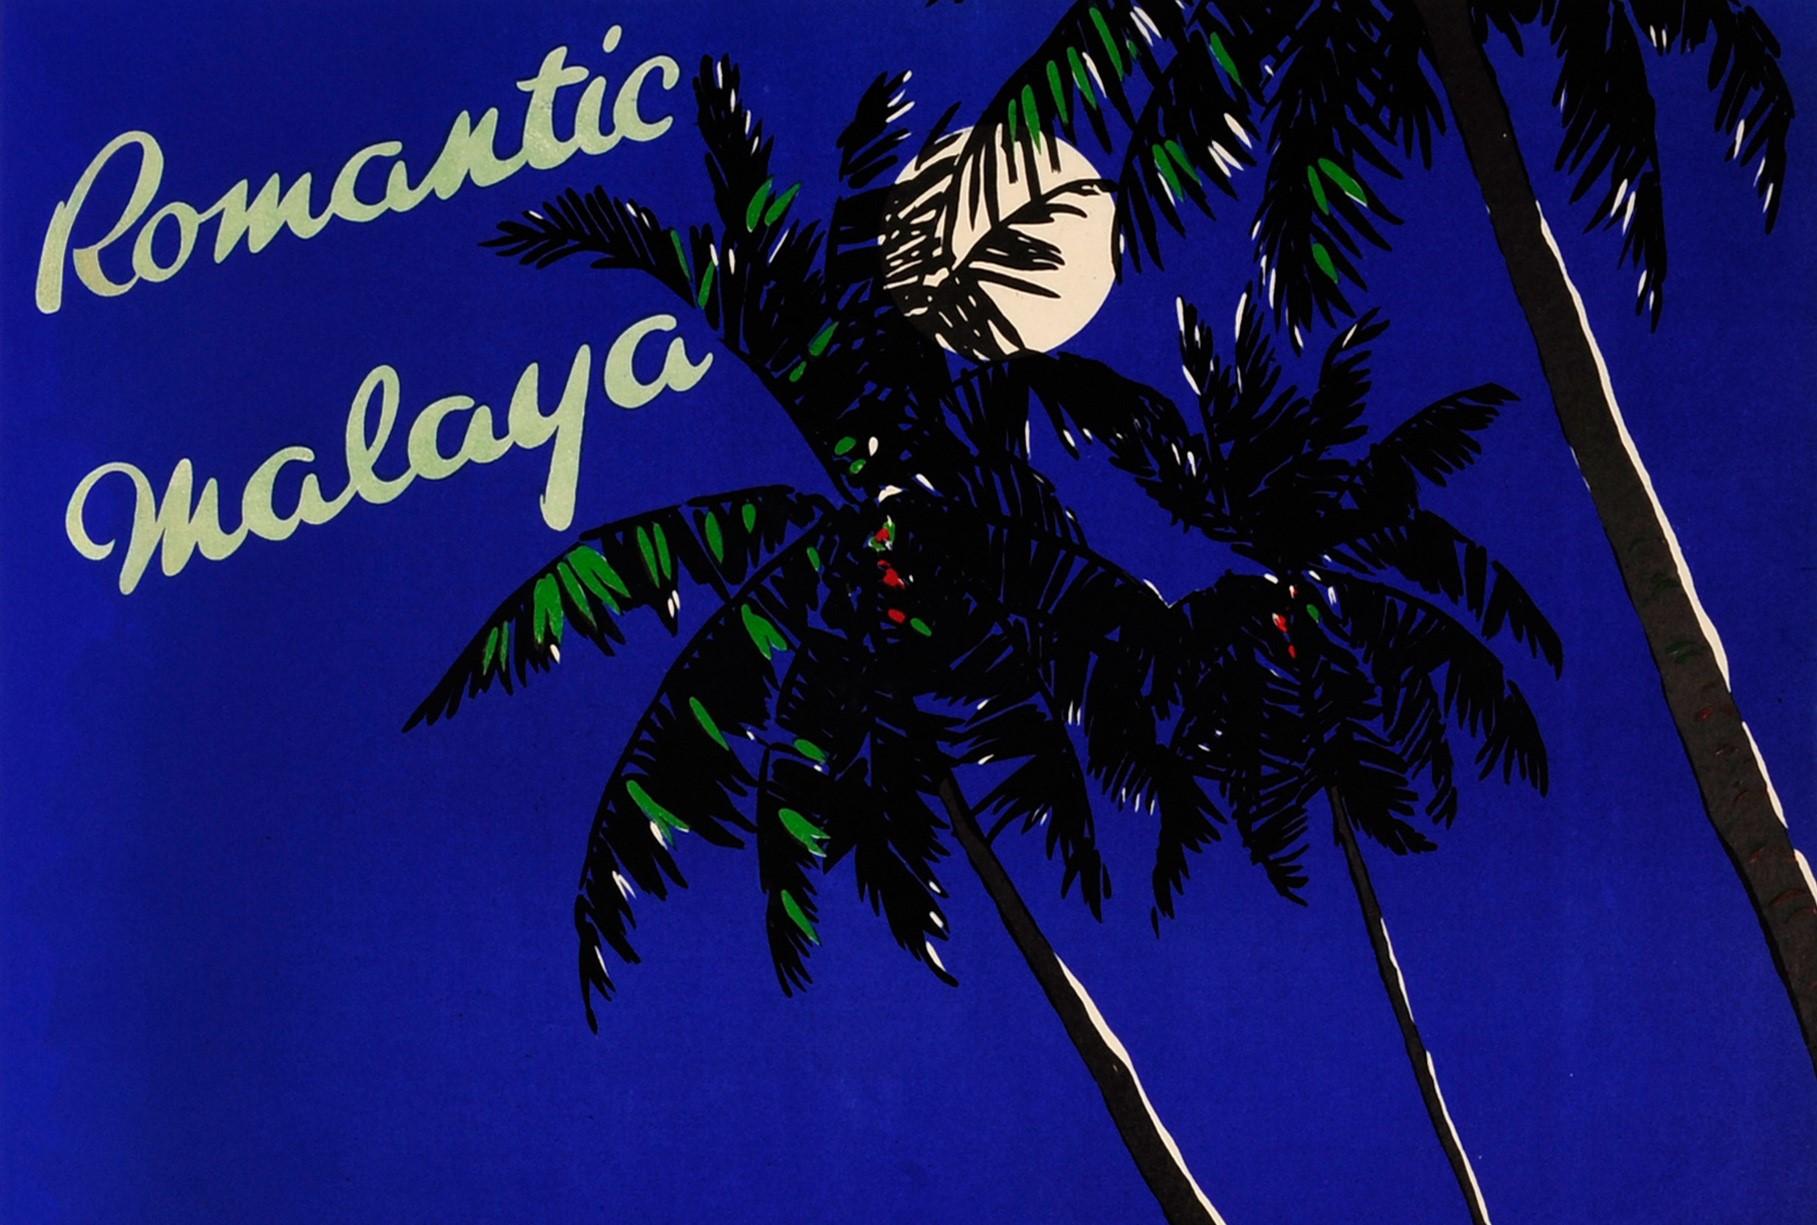 Original vintage travel poster for Romantic Malaya (now Peninsular Malaysia and Singapore) featuring a stunning night time illustration of an idyllic sandy beach scene with a calm sea and palm trees in front of a full moon next to the stylised text